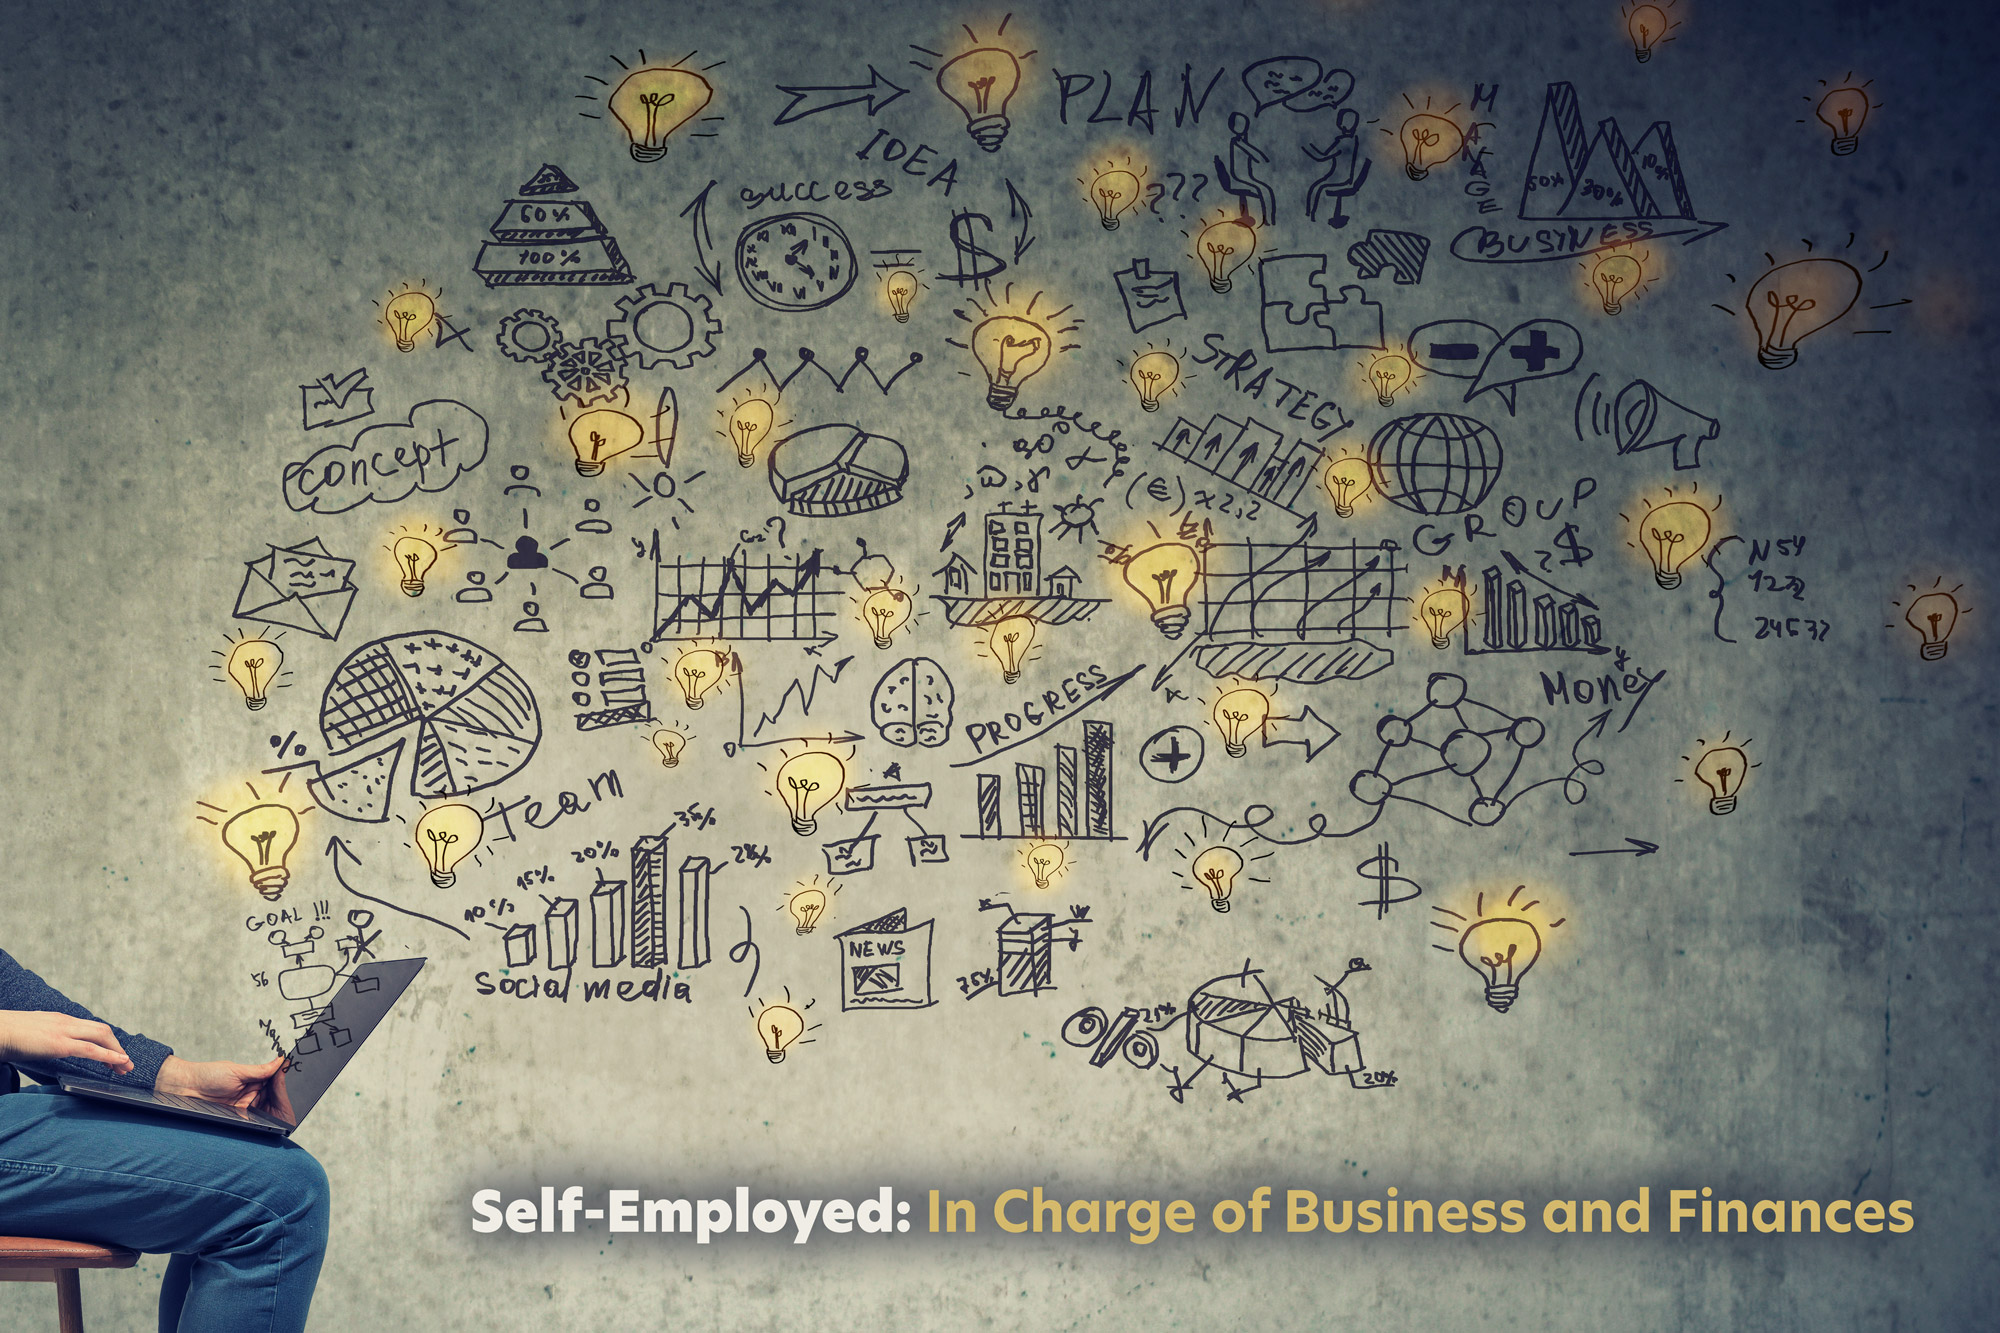 Self-Employed: In Charge of Business and Finances